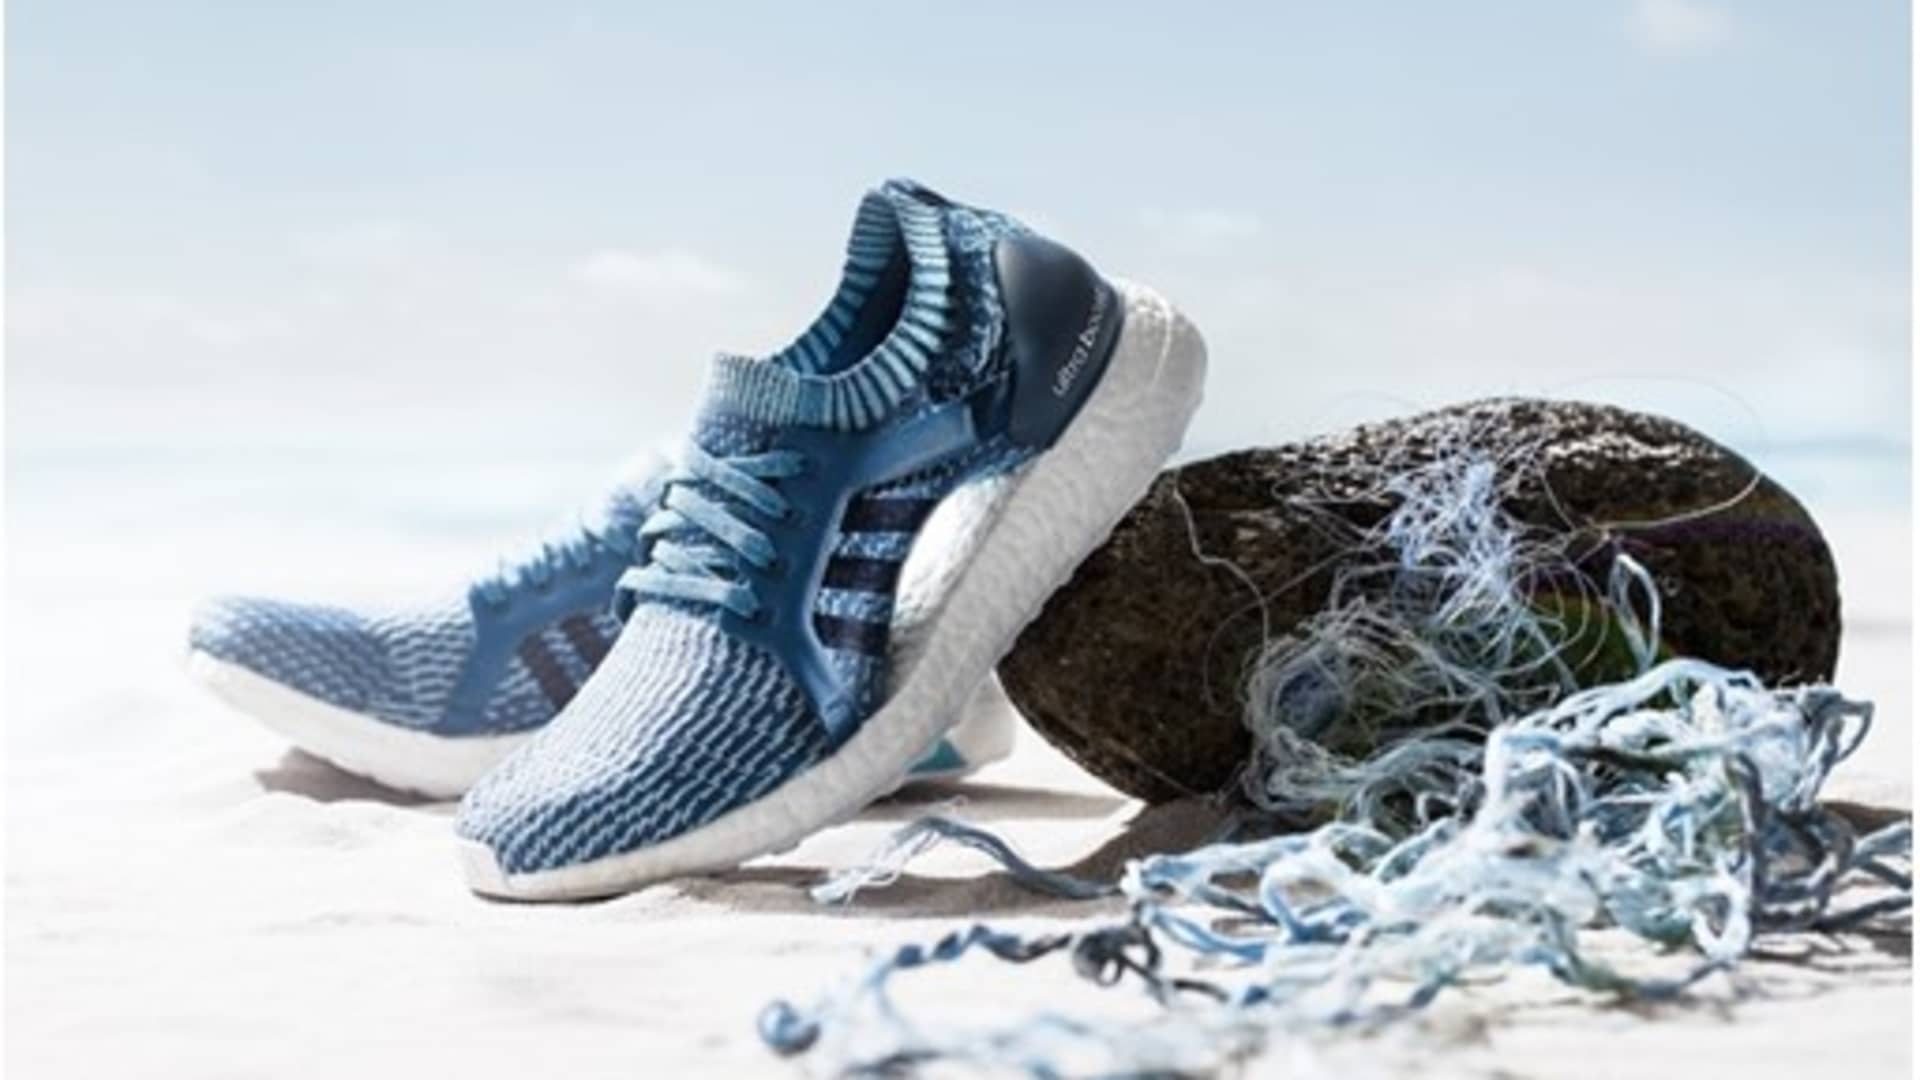 Boost Red date today Adidas sold 1 million shoes made out of ocean plastic in 2017